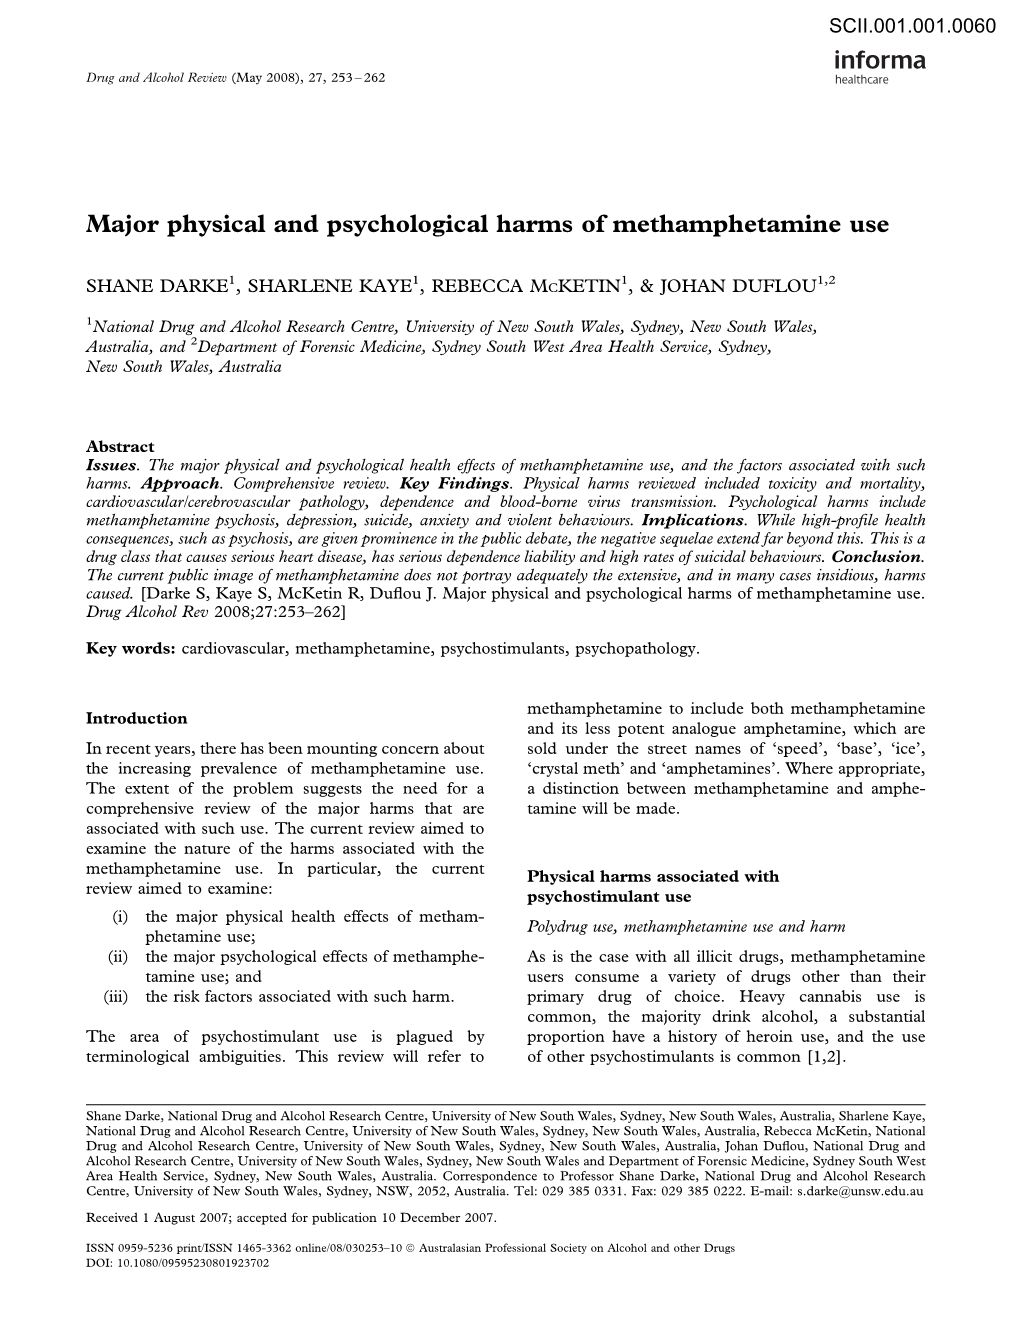 Major Physical and Psychological Harms of Methamphetamine Use